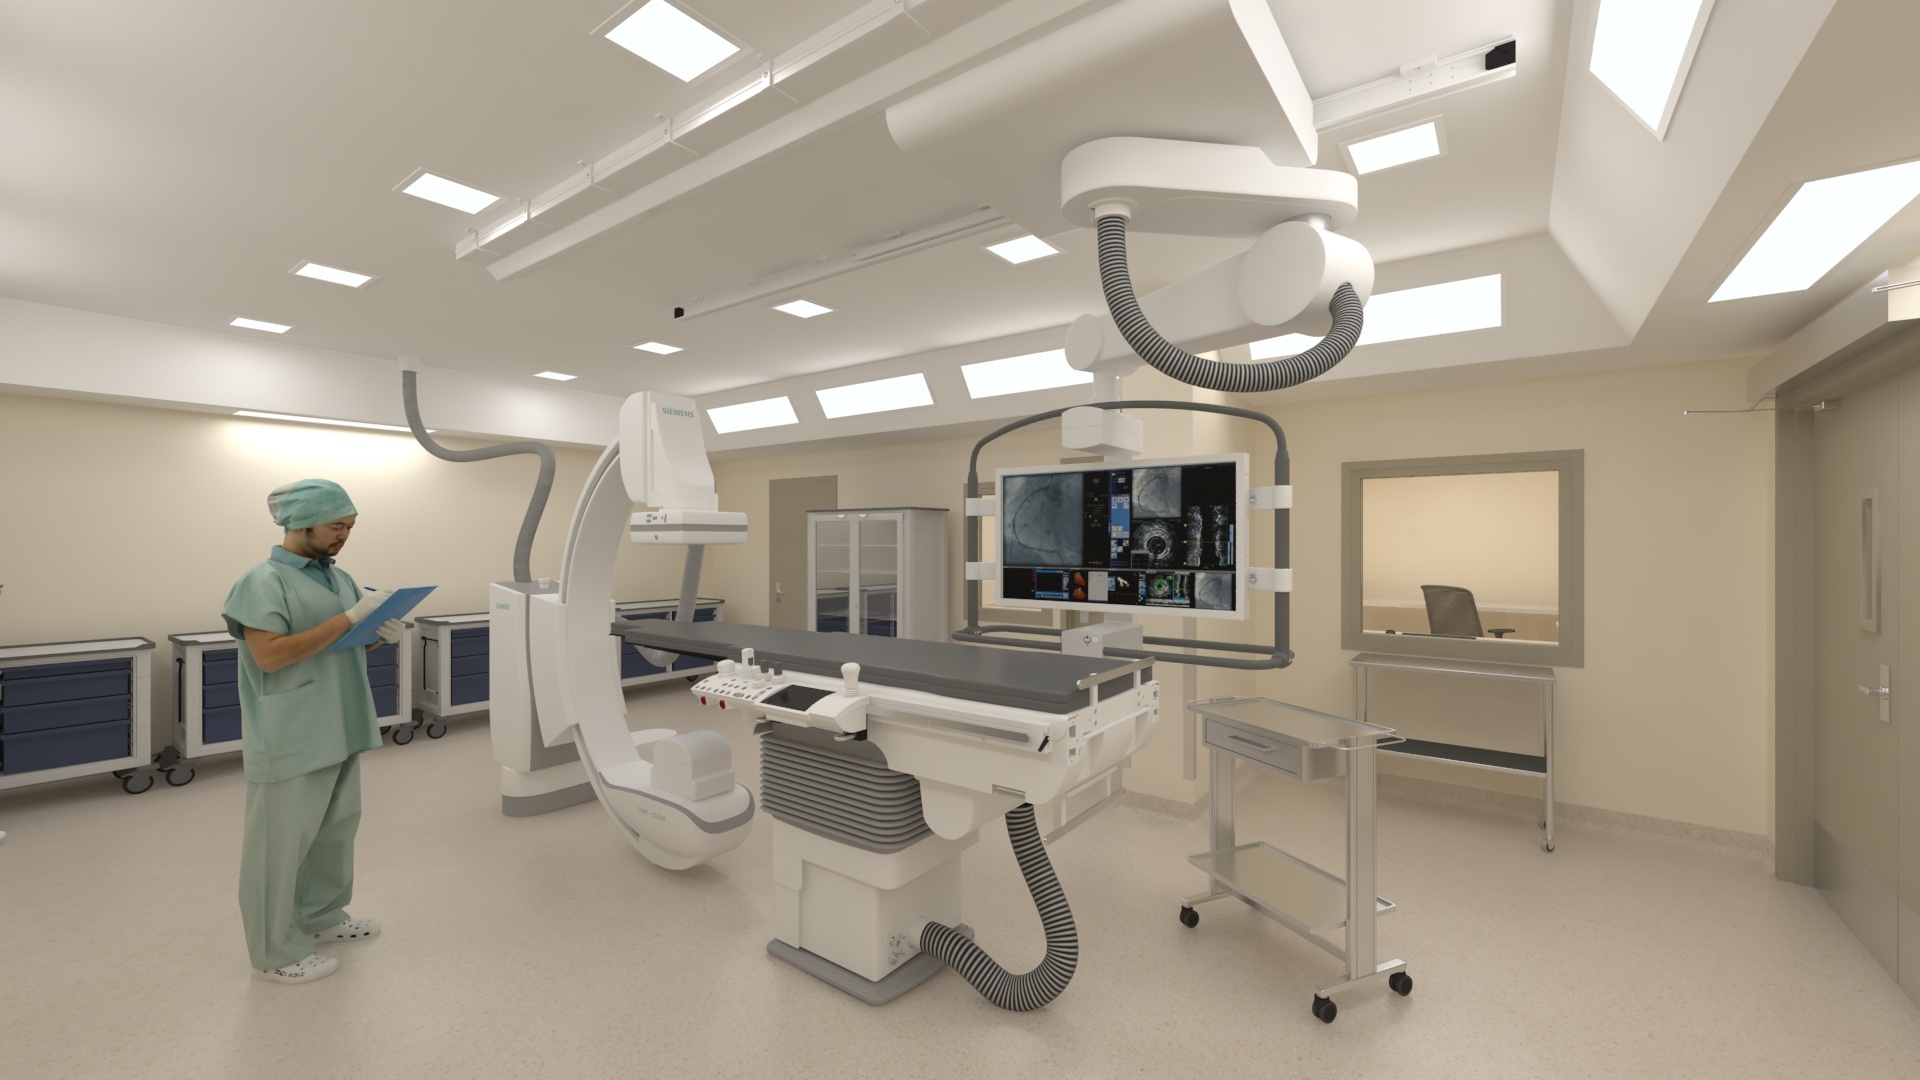 New cardiac catheterization lab that will allow for faster, easier access to care